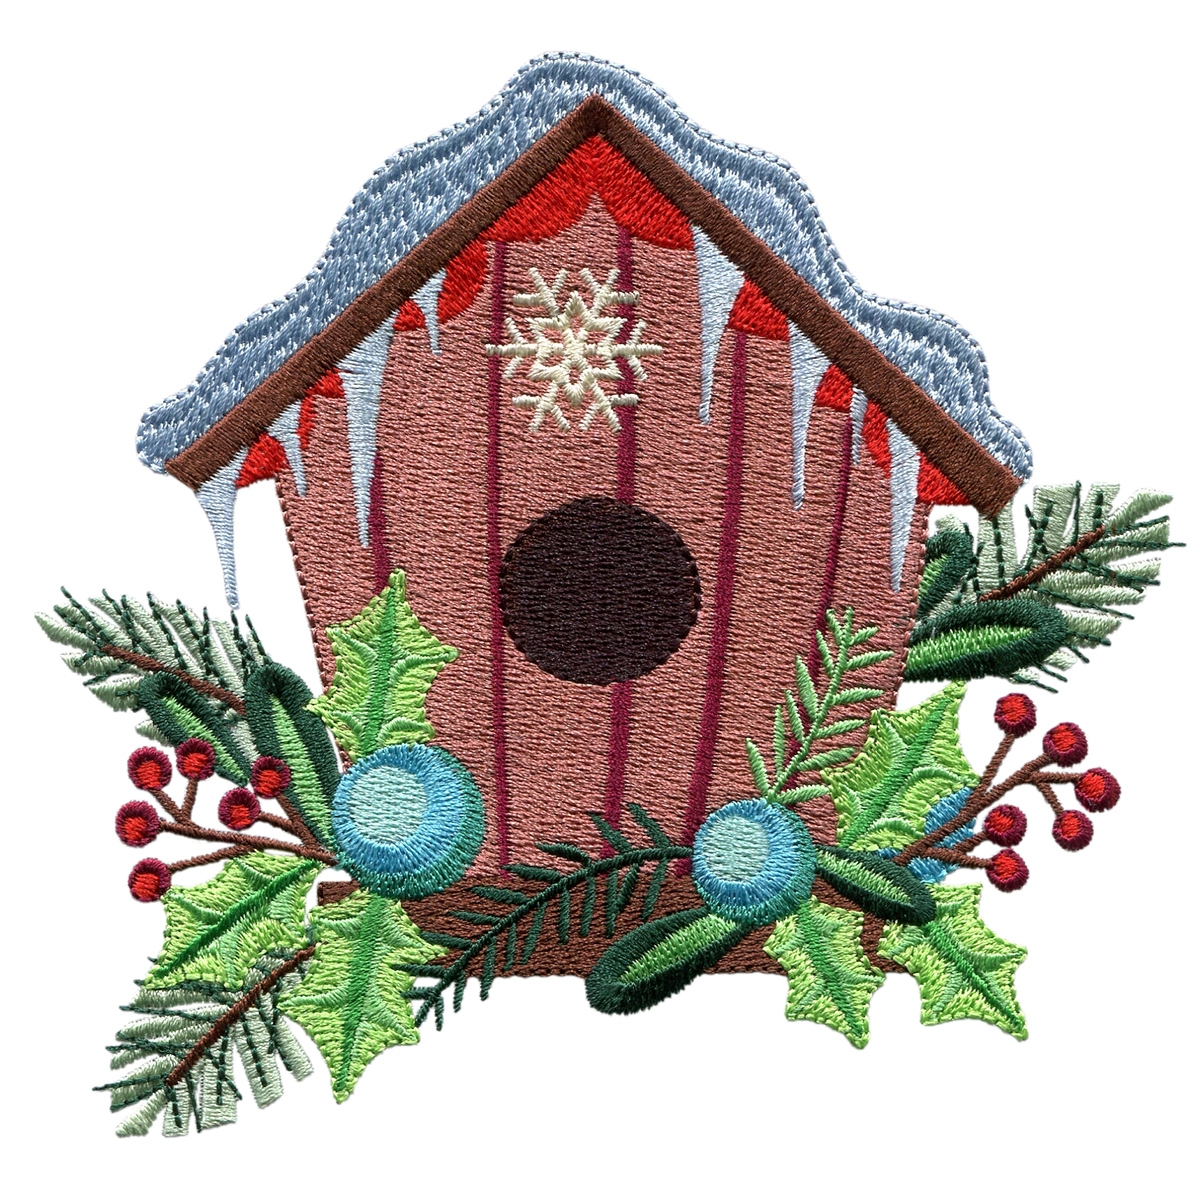 Bird Embroidery Pattern Birdhouse Winter Is For The Birds Embroidery Design